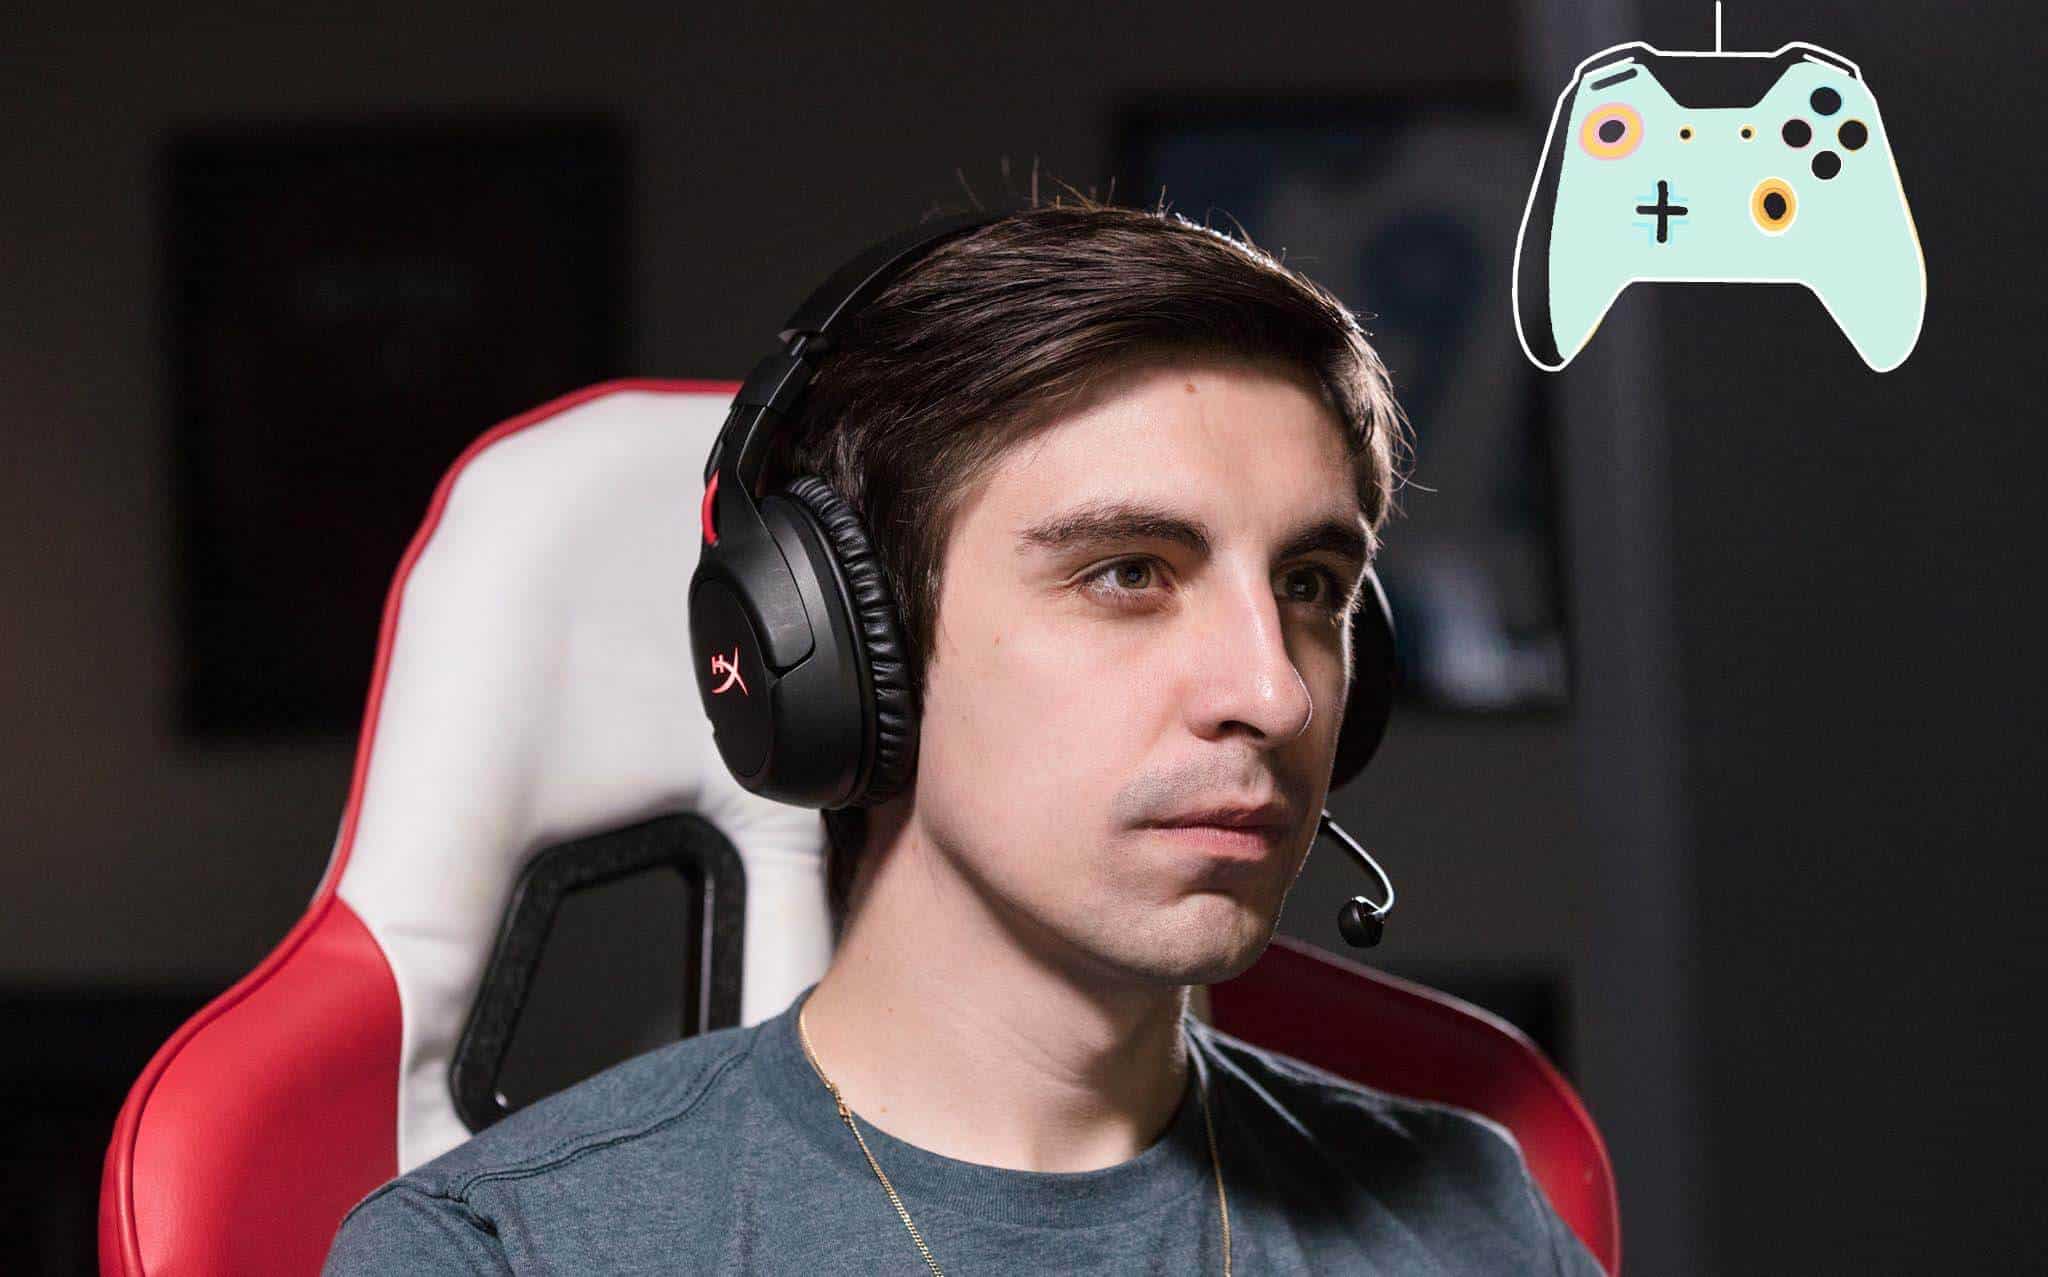 5 TikTokers who became popular Twitch streamers